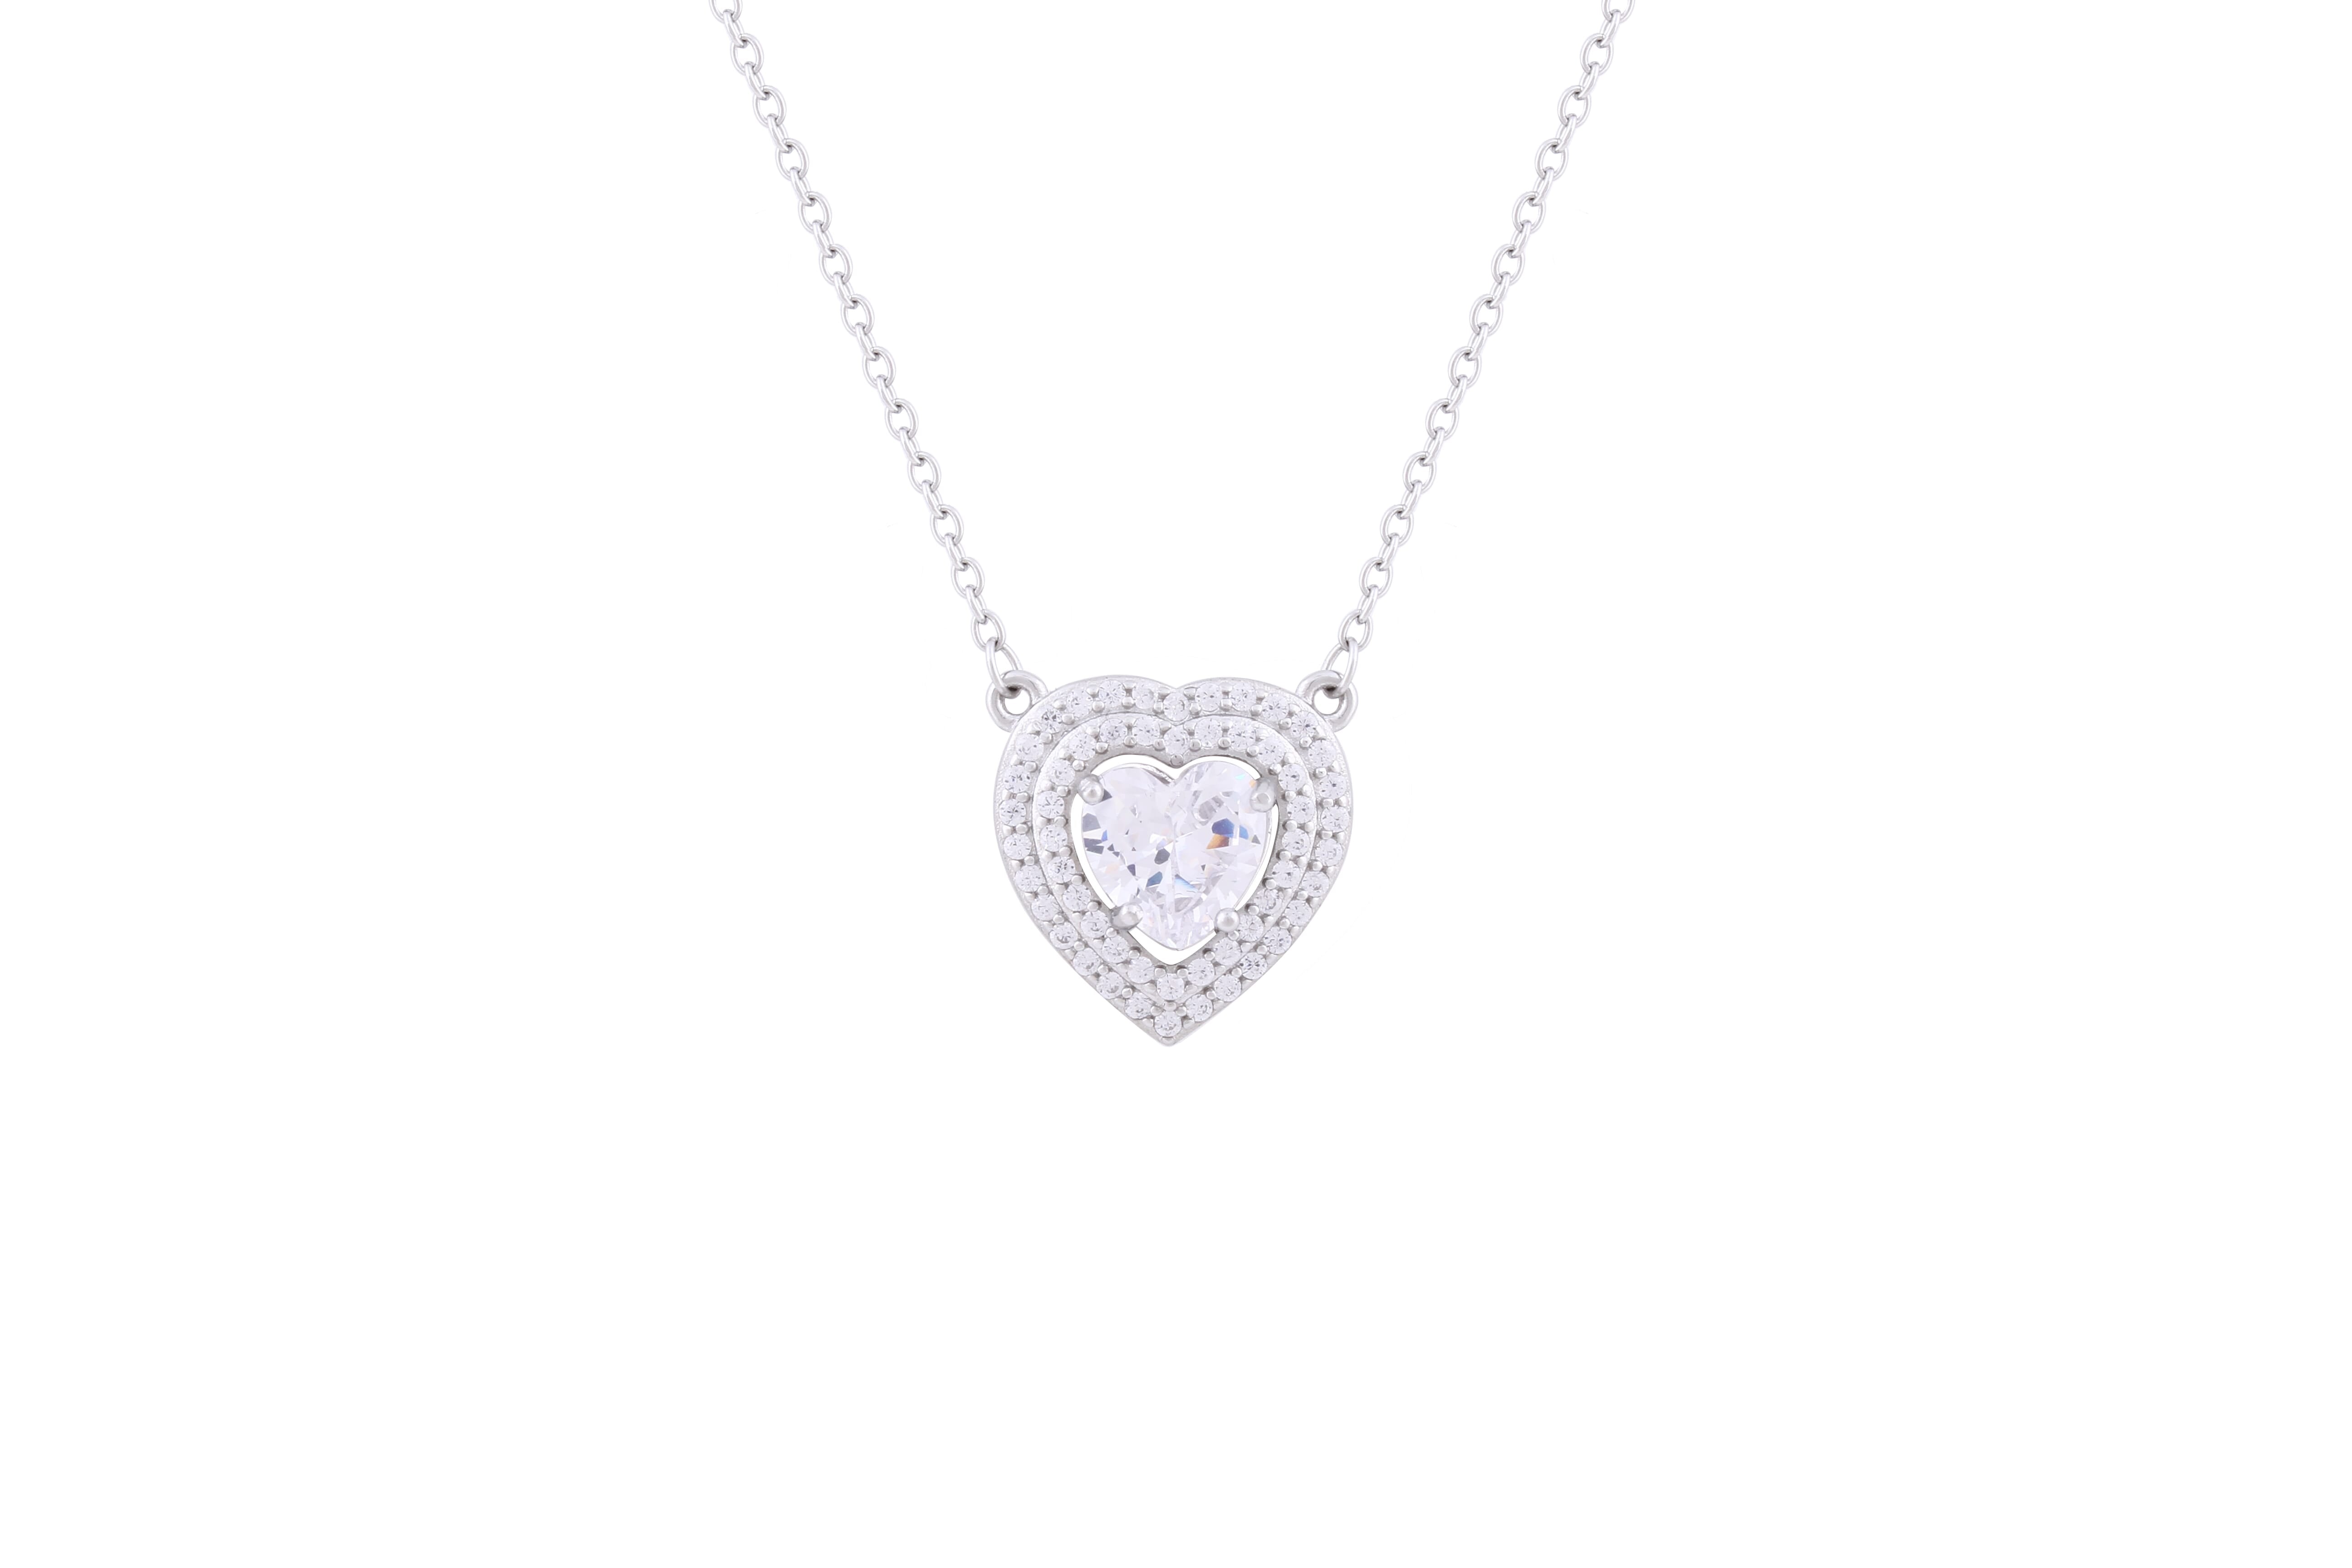 Asfour Sterling Silver Heart necklace Inlaid With Zircon Stones ND0008